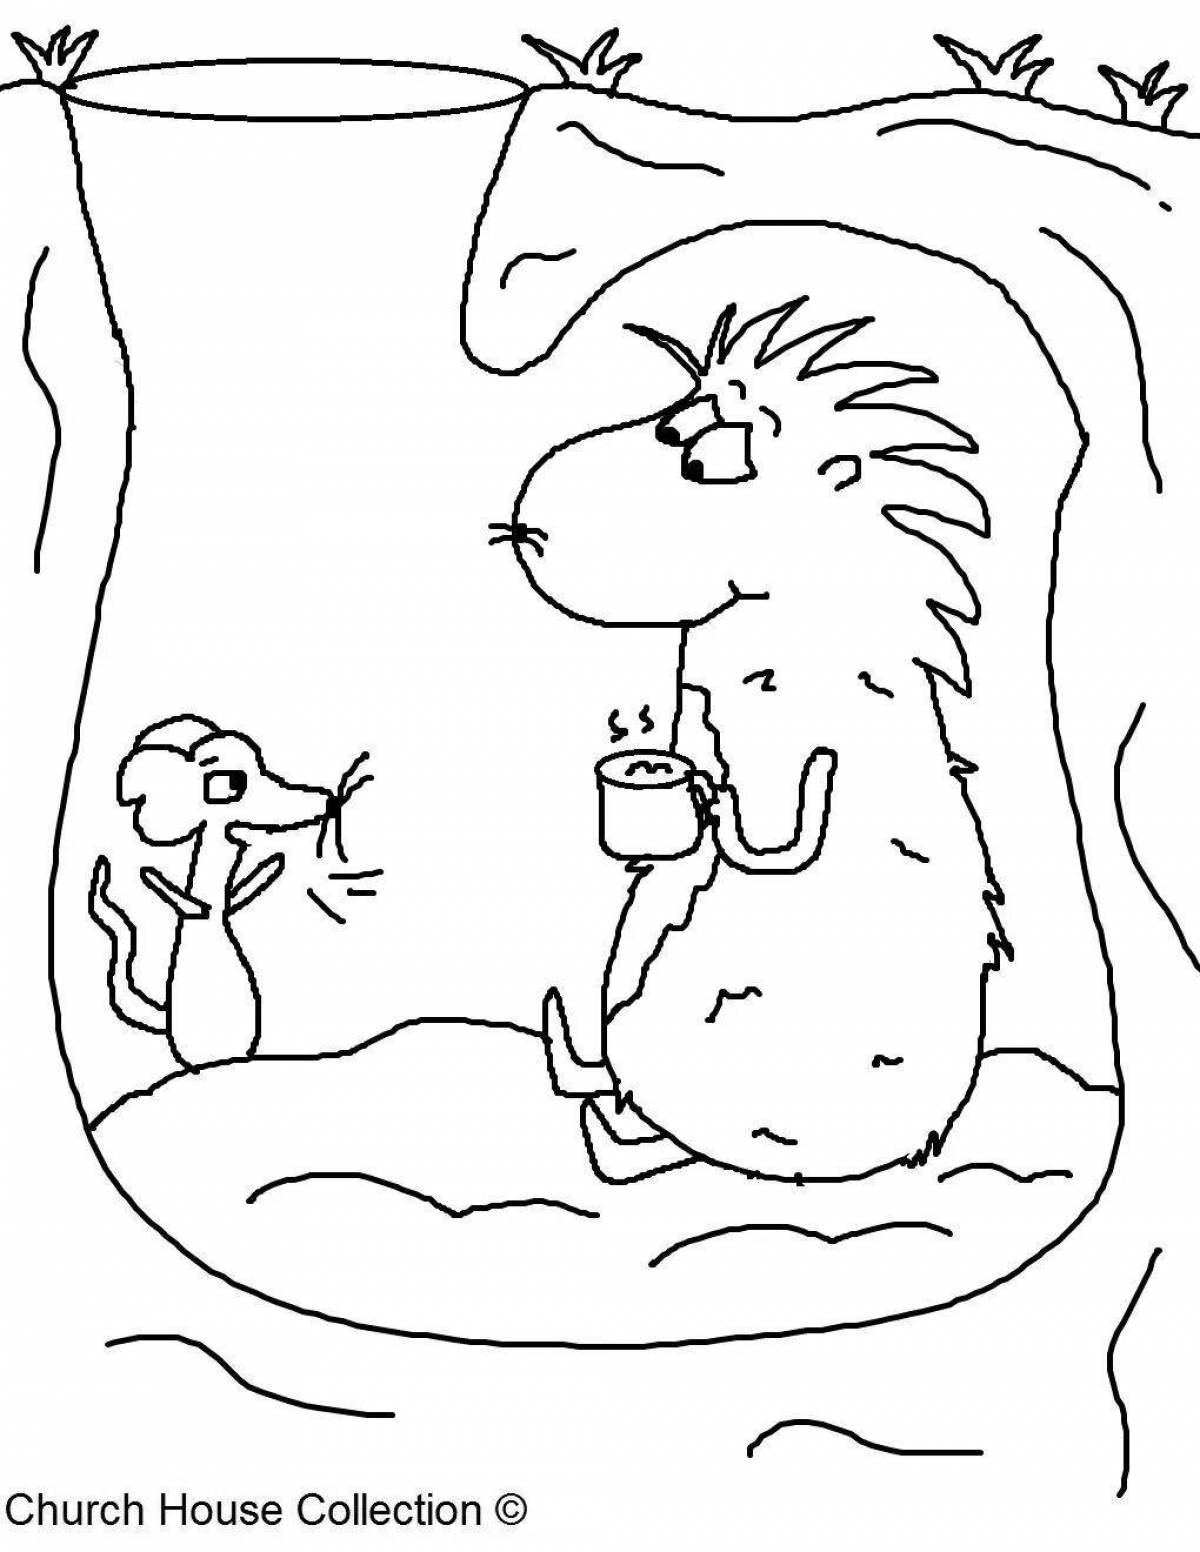 Great groundhog day coloring page